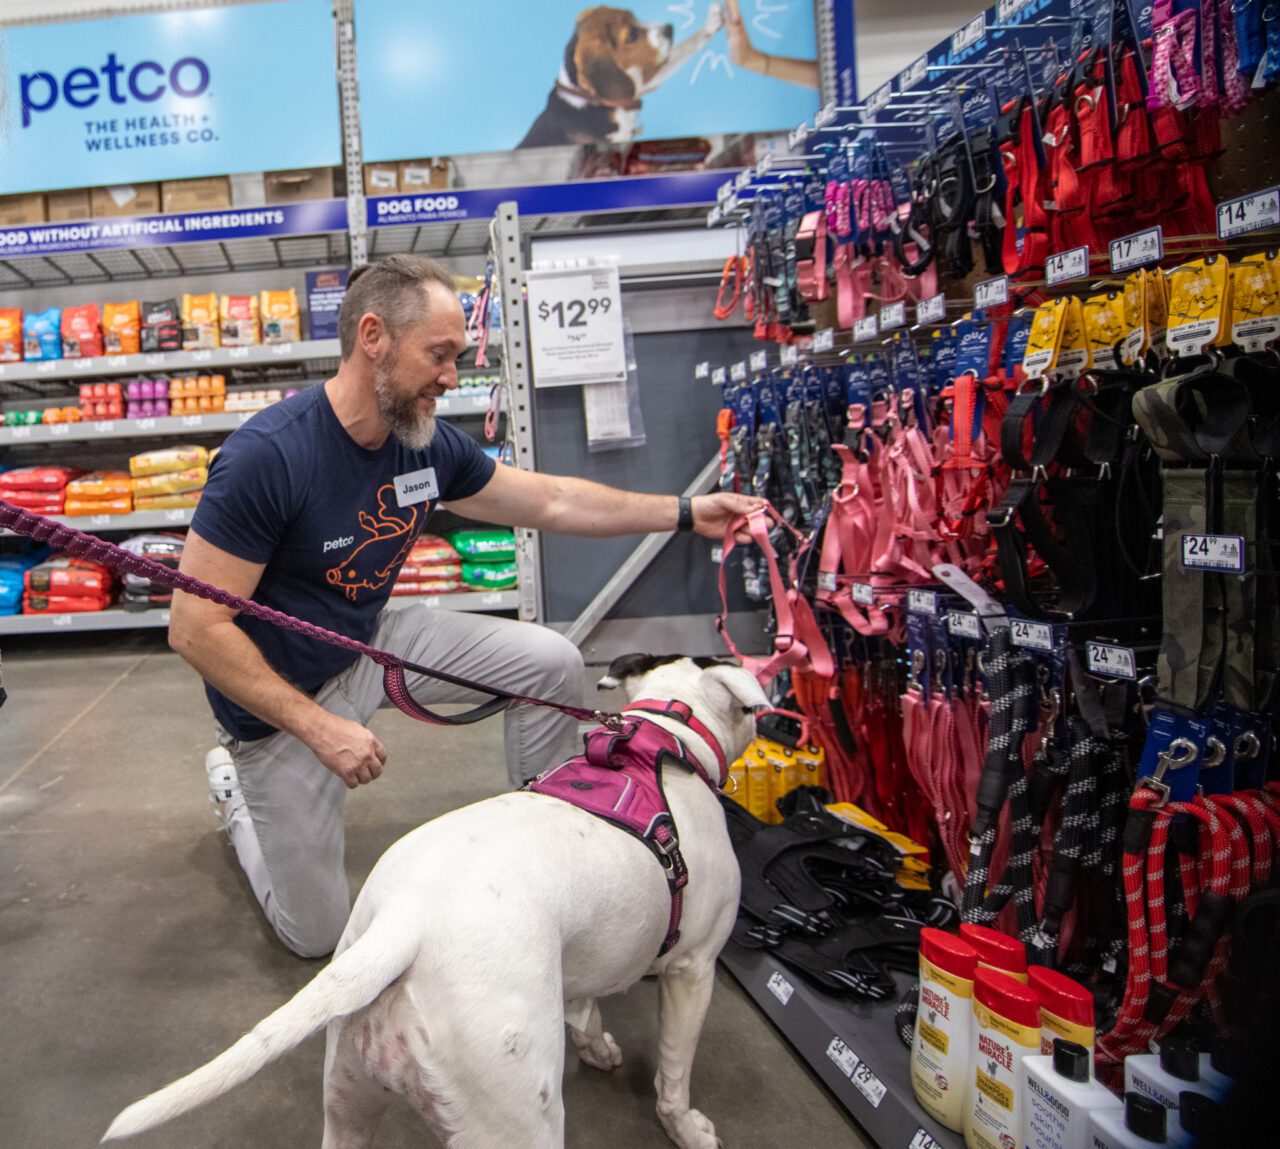 A Petco "partner" helps a customer find just the right product at Petco shop-in-shop in Lowe's.